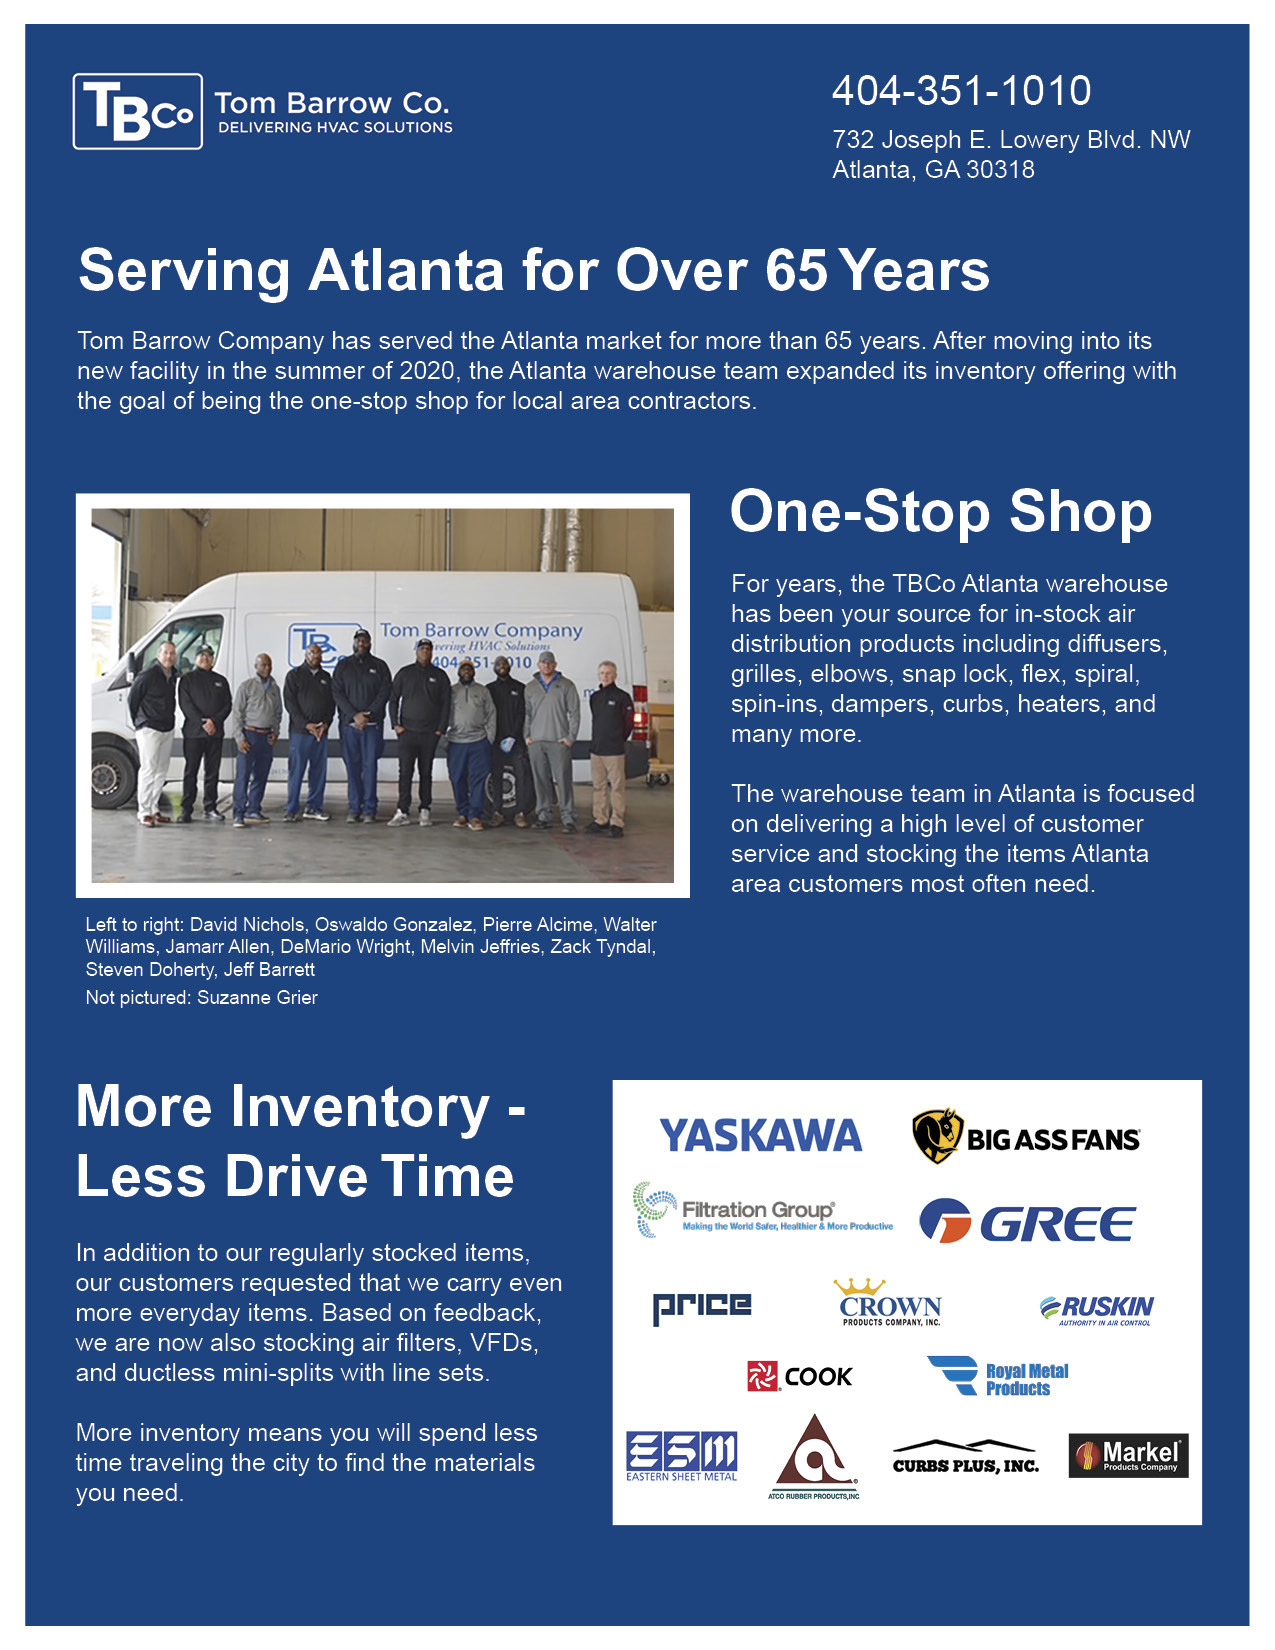 Branch Feature Serving Atlanta for Over 65 Years